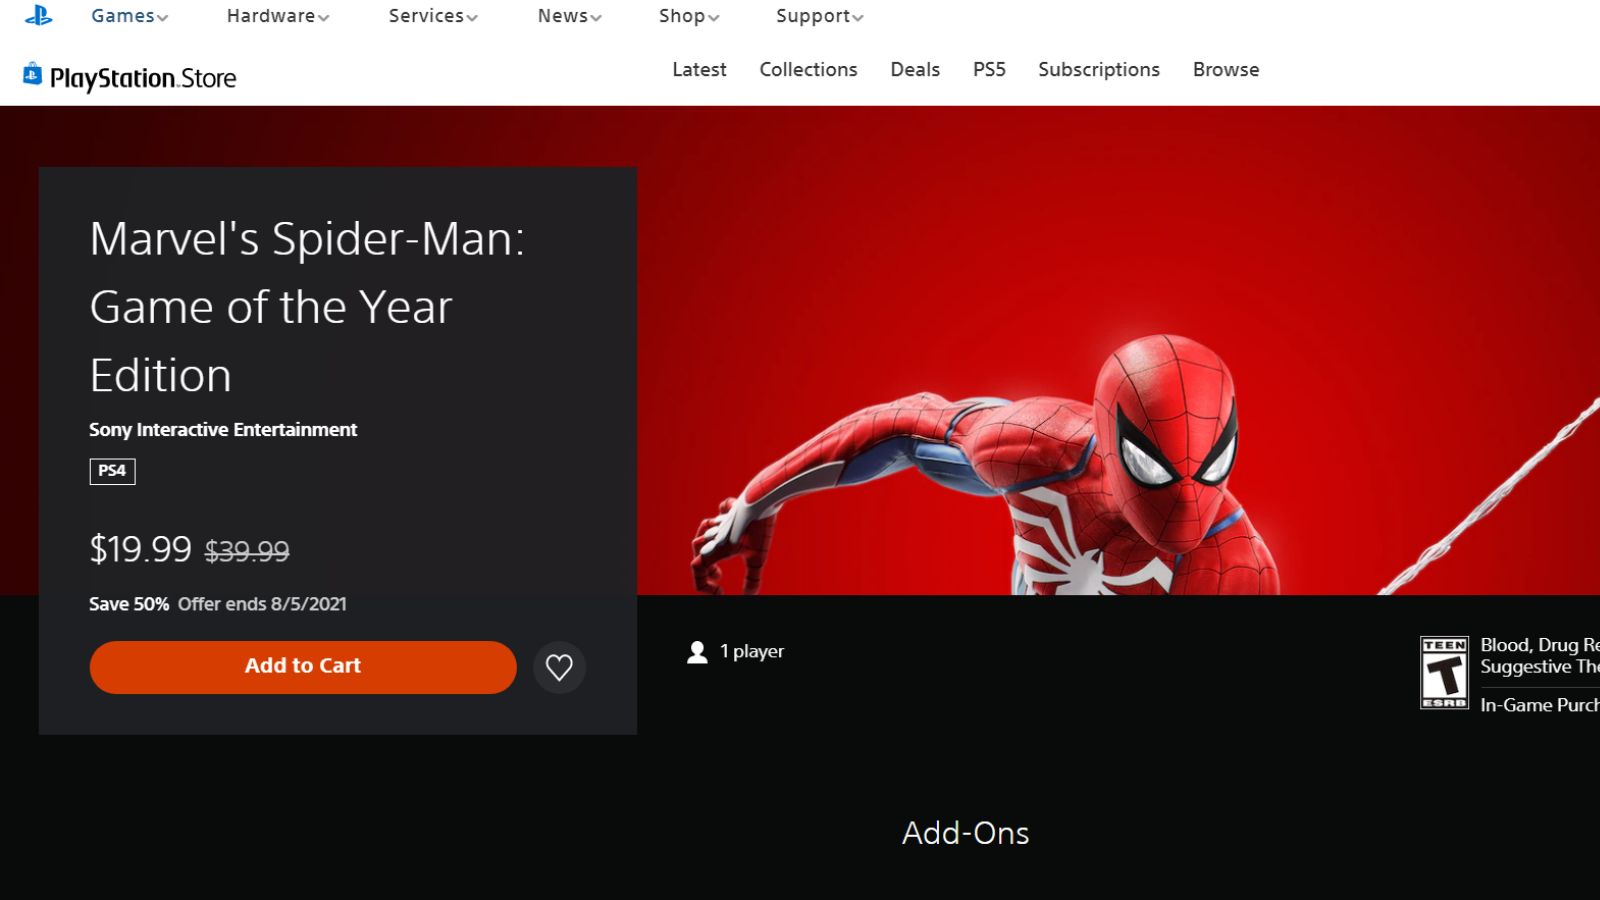 'Marvel's Spider-Man' PlayStation store page